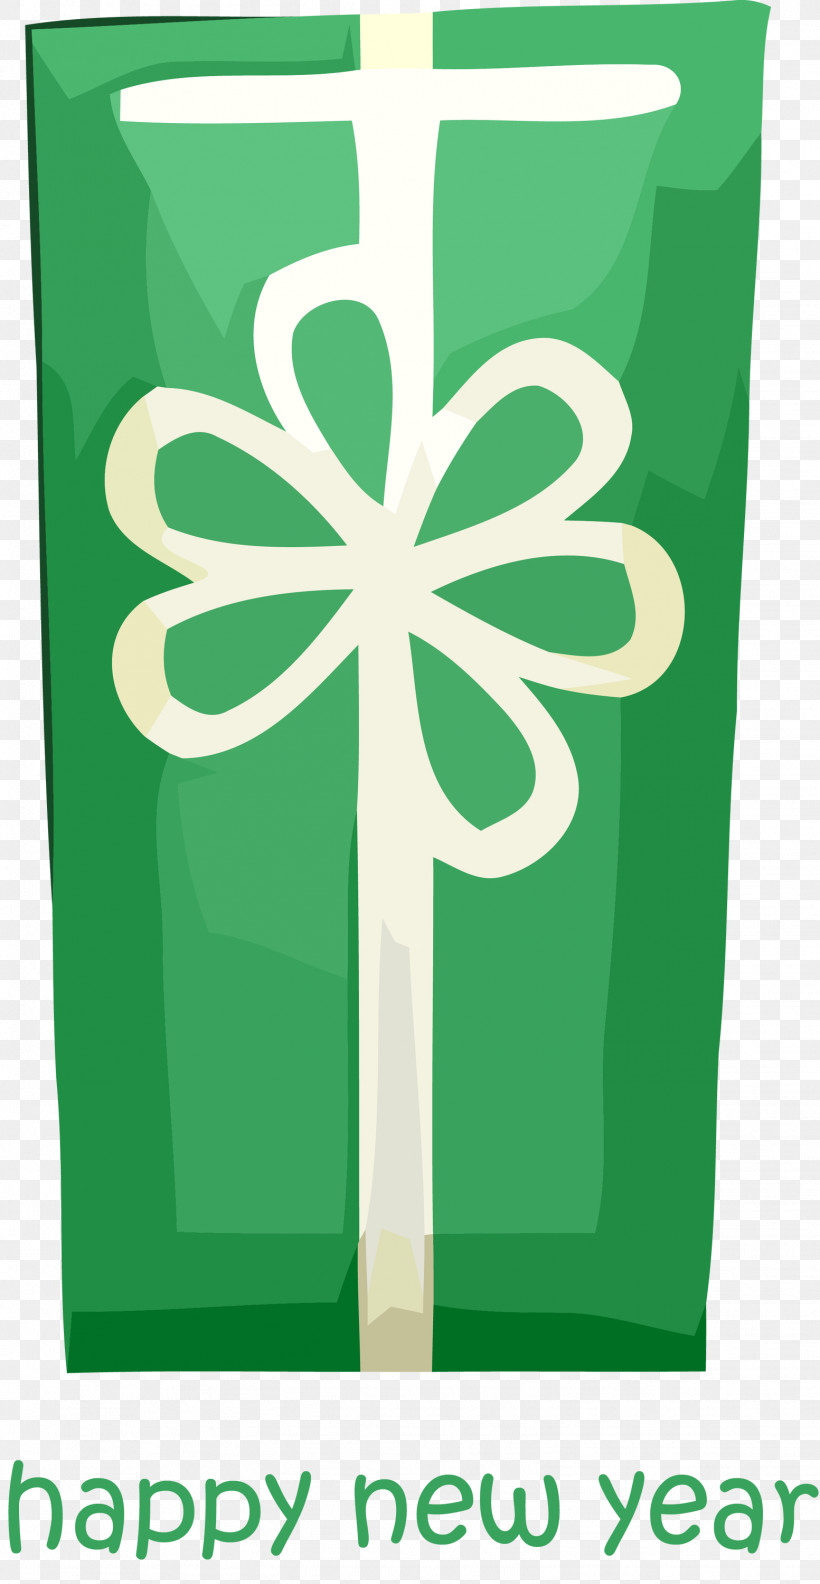 Happy New Year Gift New Year Gifts Presents, PNG, 1553x3000px, Happy New Year Gift, Flag, Green, Linens, New Year Gifts Download Free